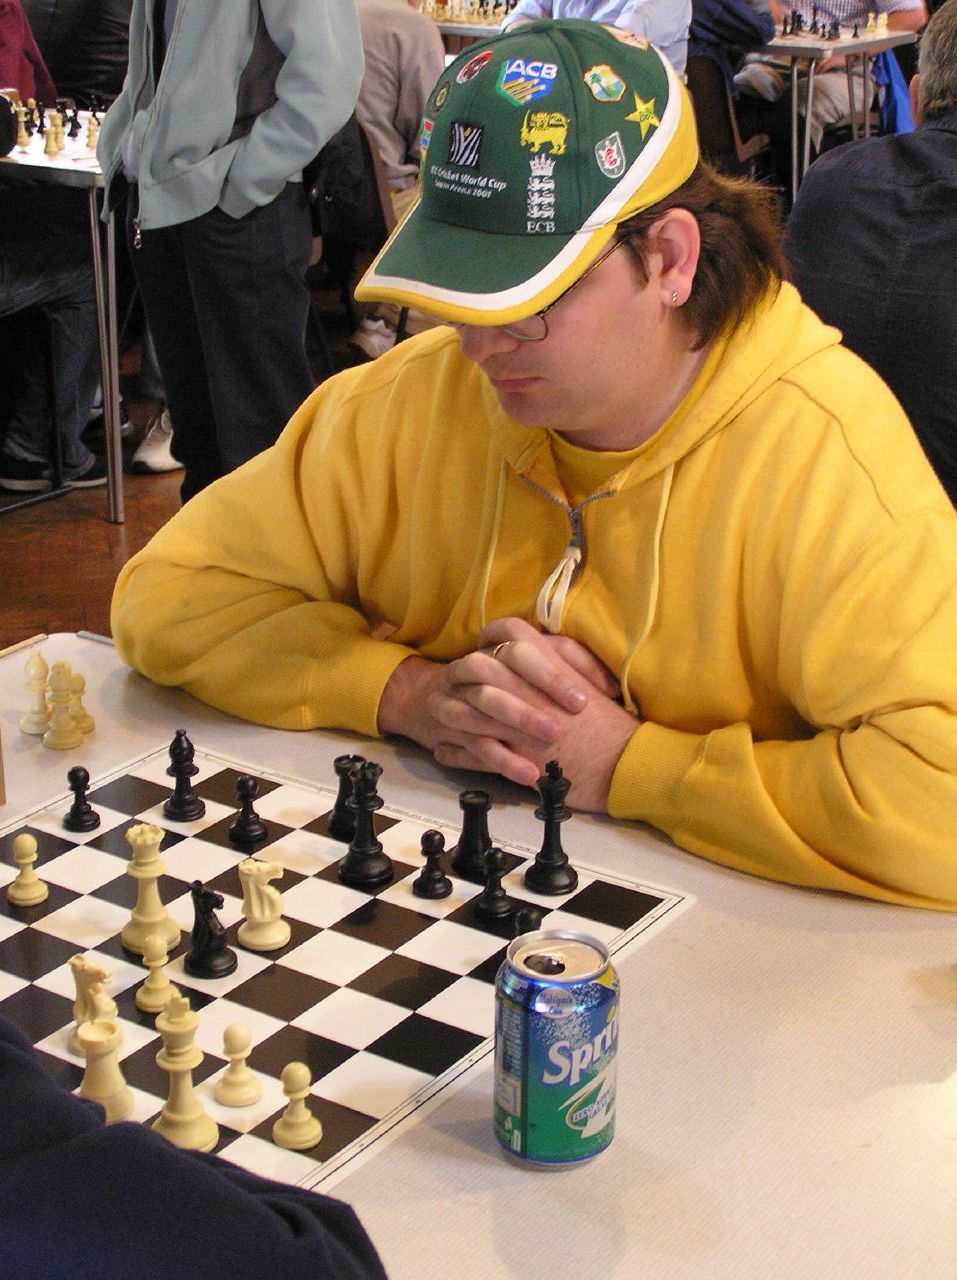 a man is sitting at the table playing a game of chess